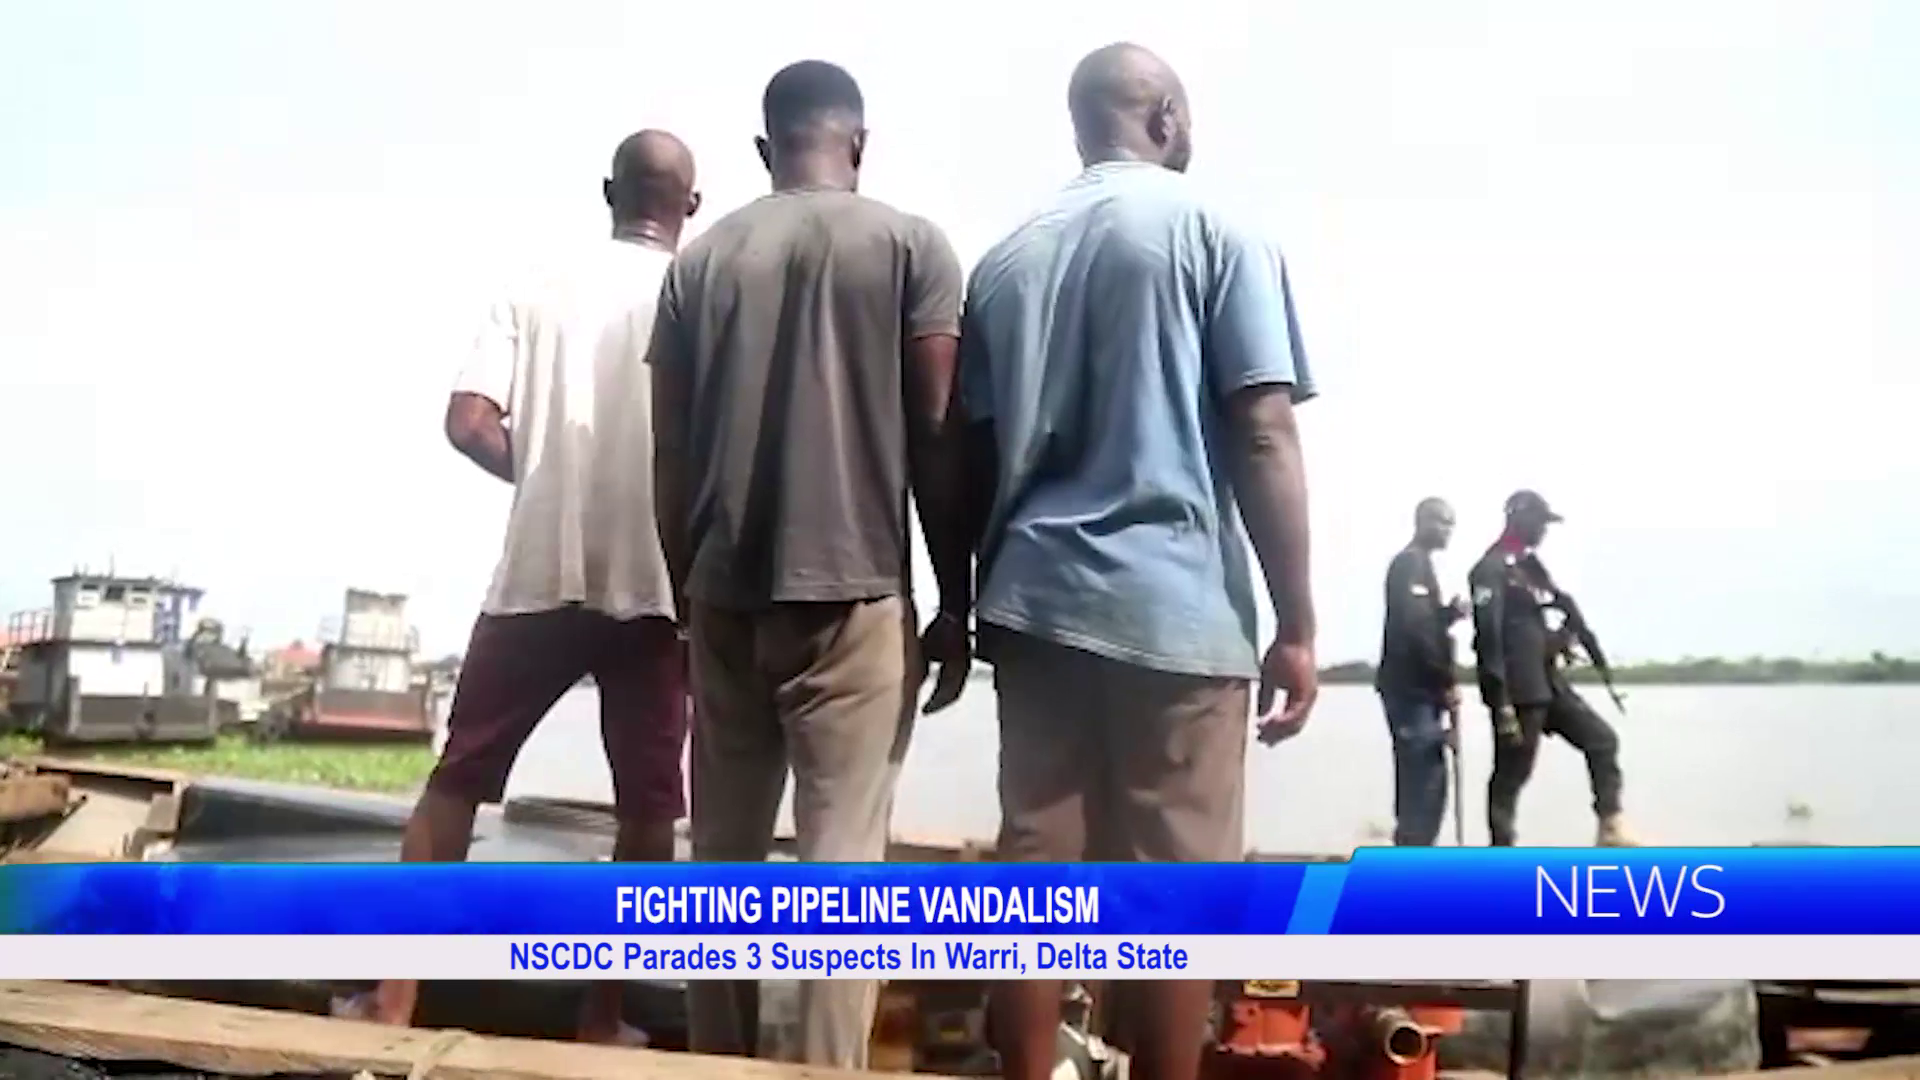 NSCDC Parades 3 Suspects Involved In Alleged Pipeline Vandalization In Warri, Delta State